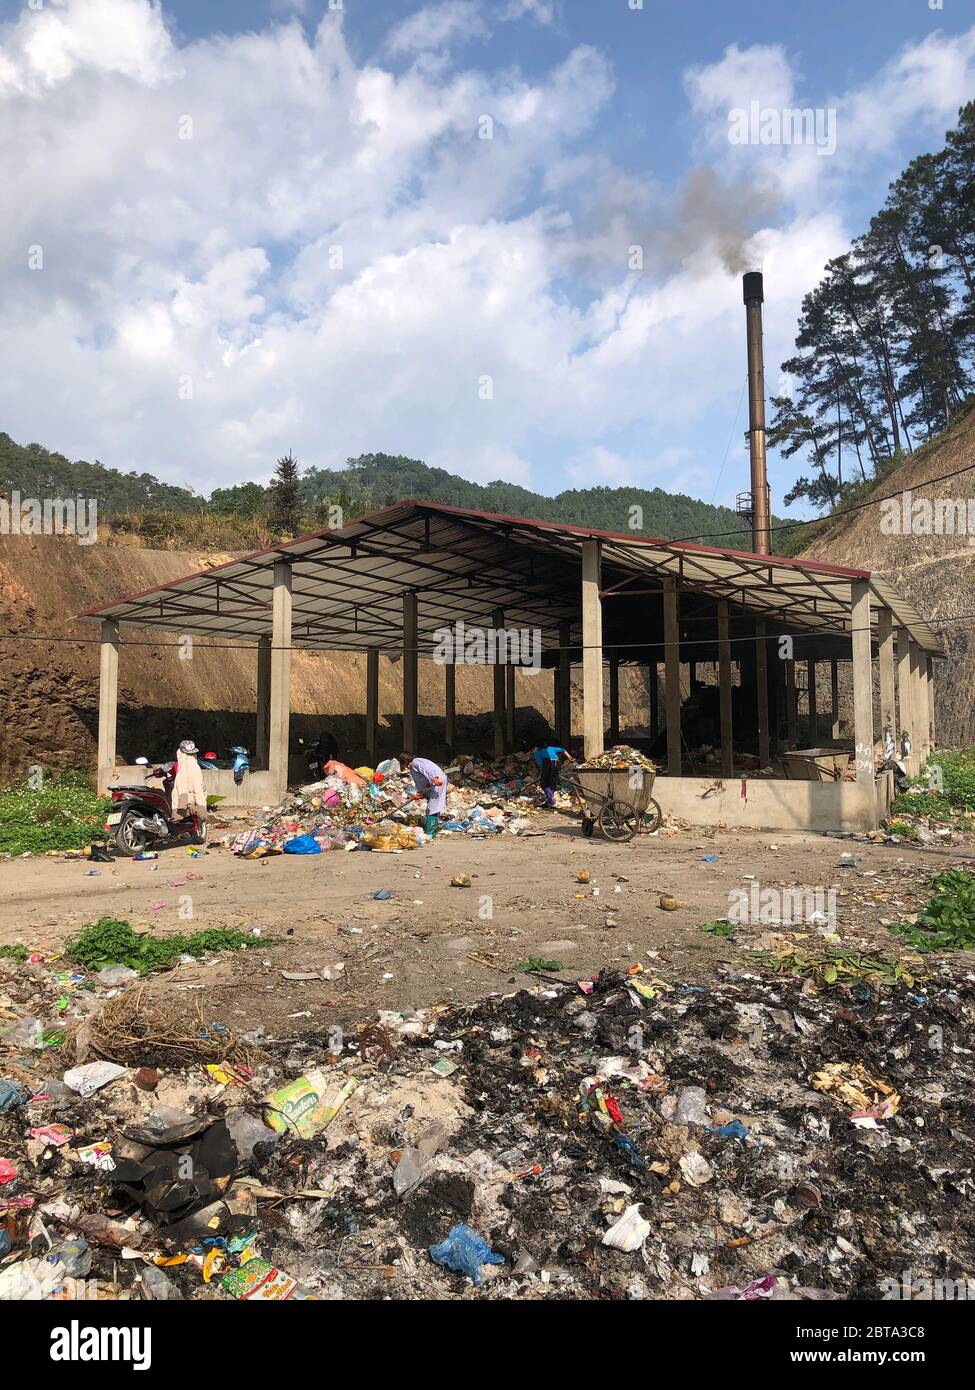 Hà Giang, vietnam, January 11, 2020 - Outdoors incinerator close to the city center Stock Photo